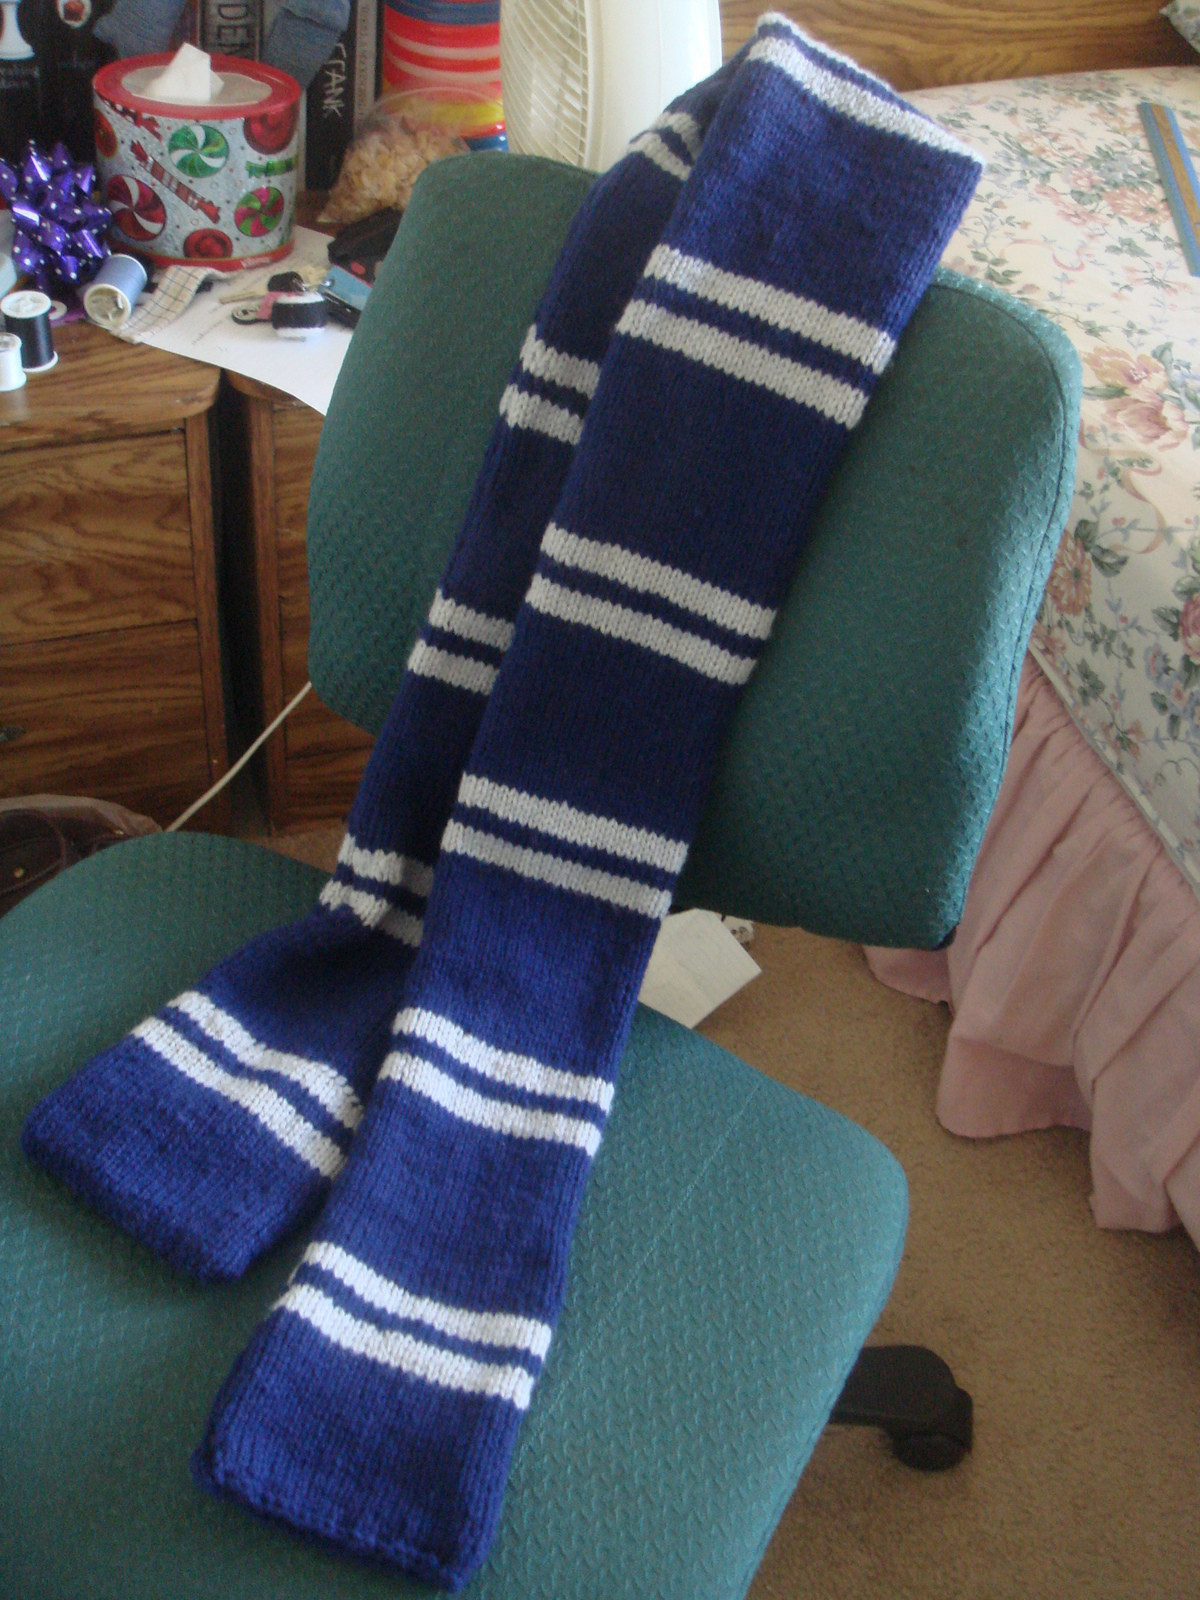 Hogwarts House Scarf Knitting Pattern Harry Potter Ravenclaw Scarf How To Knit Or Crochet A Stripy Scarf